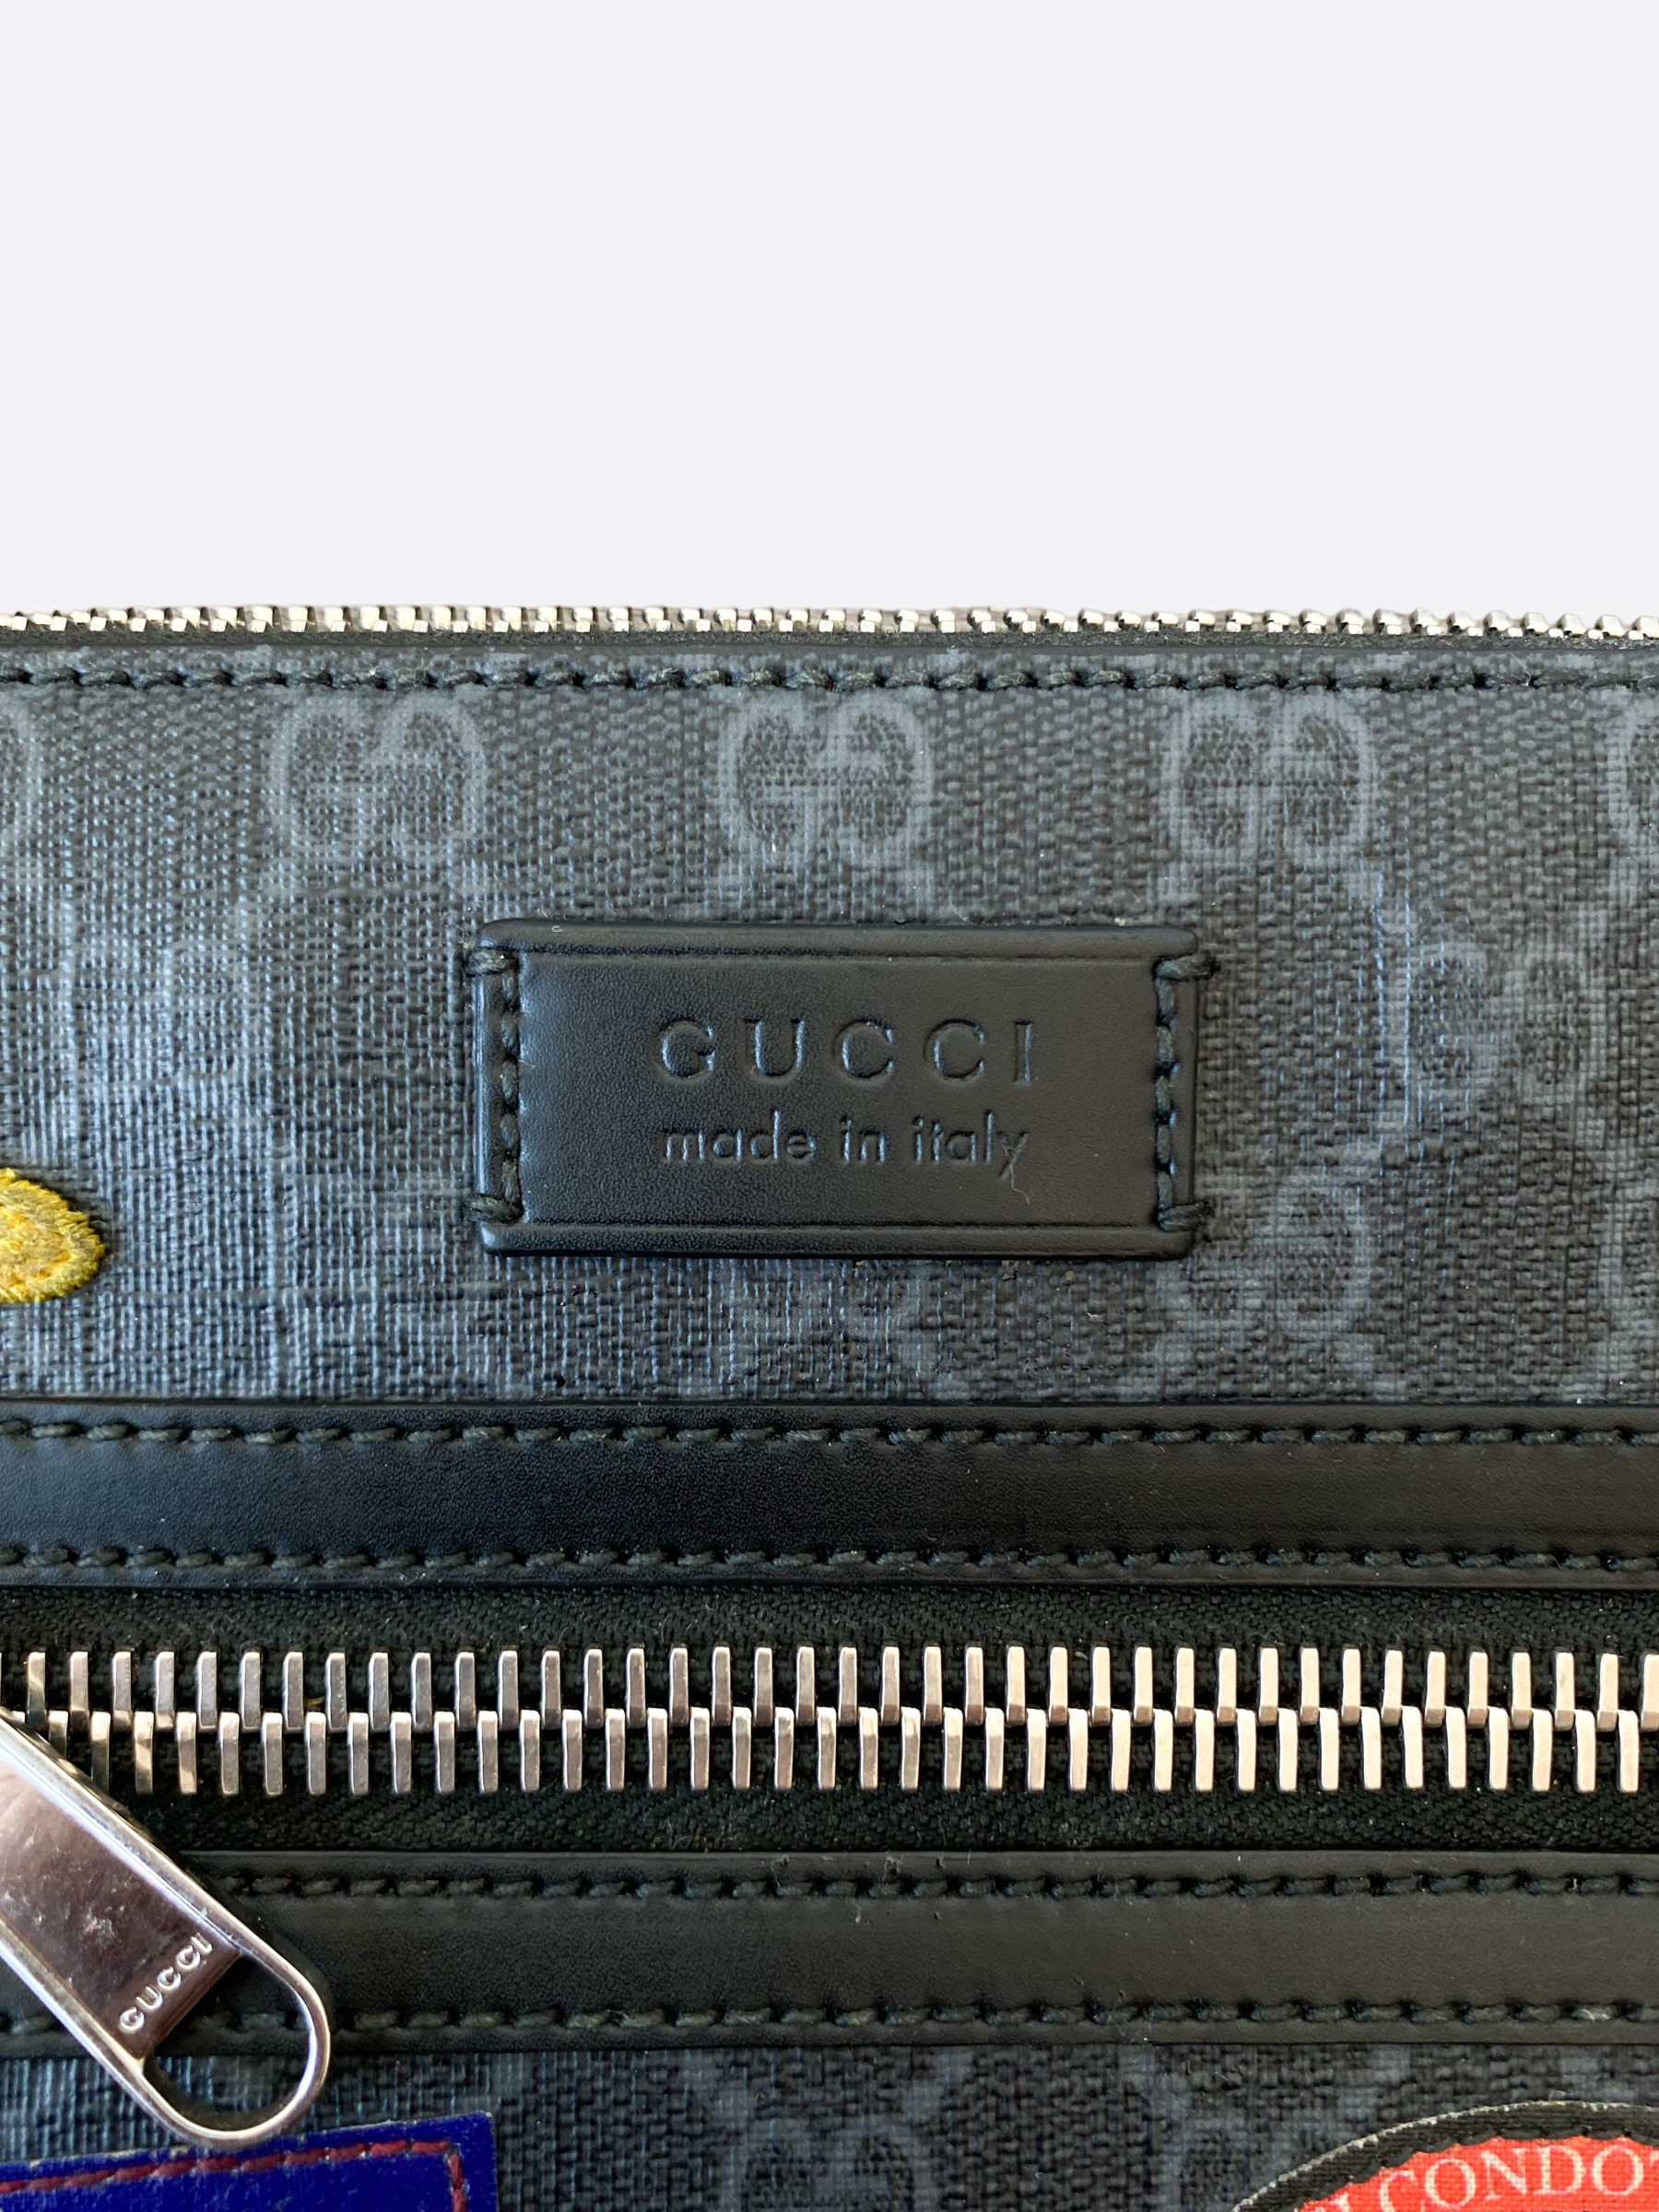 gucci #clutch #monogram #patches #streetstyle